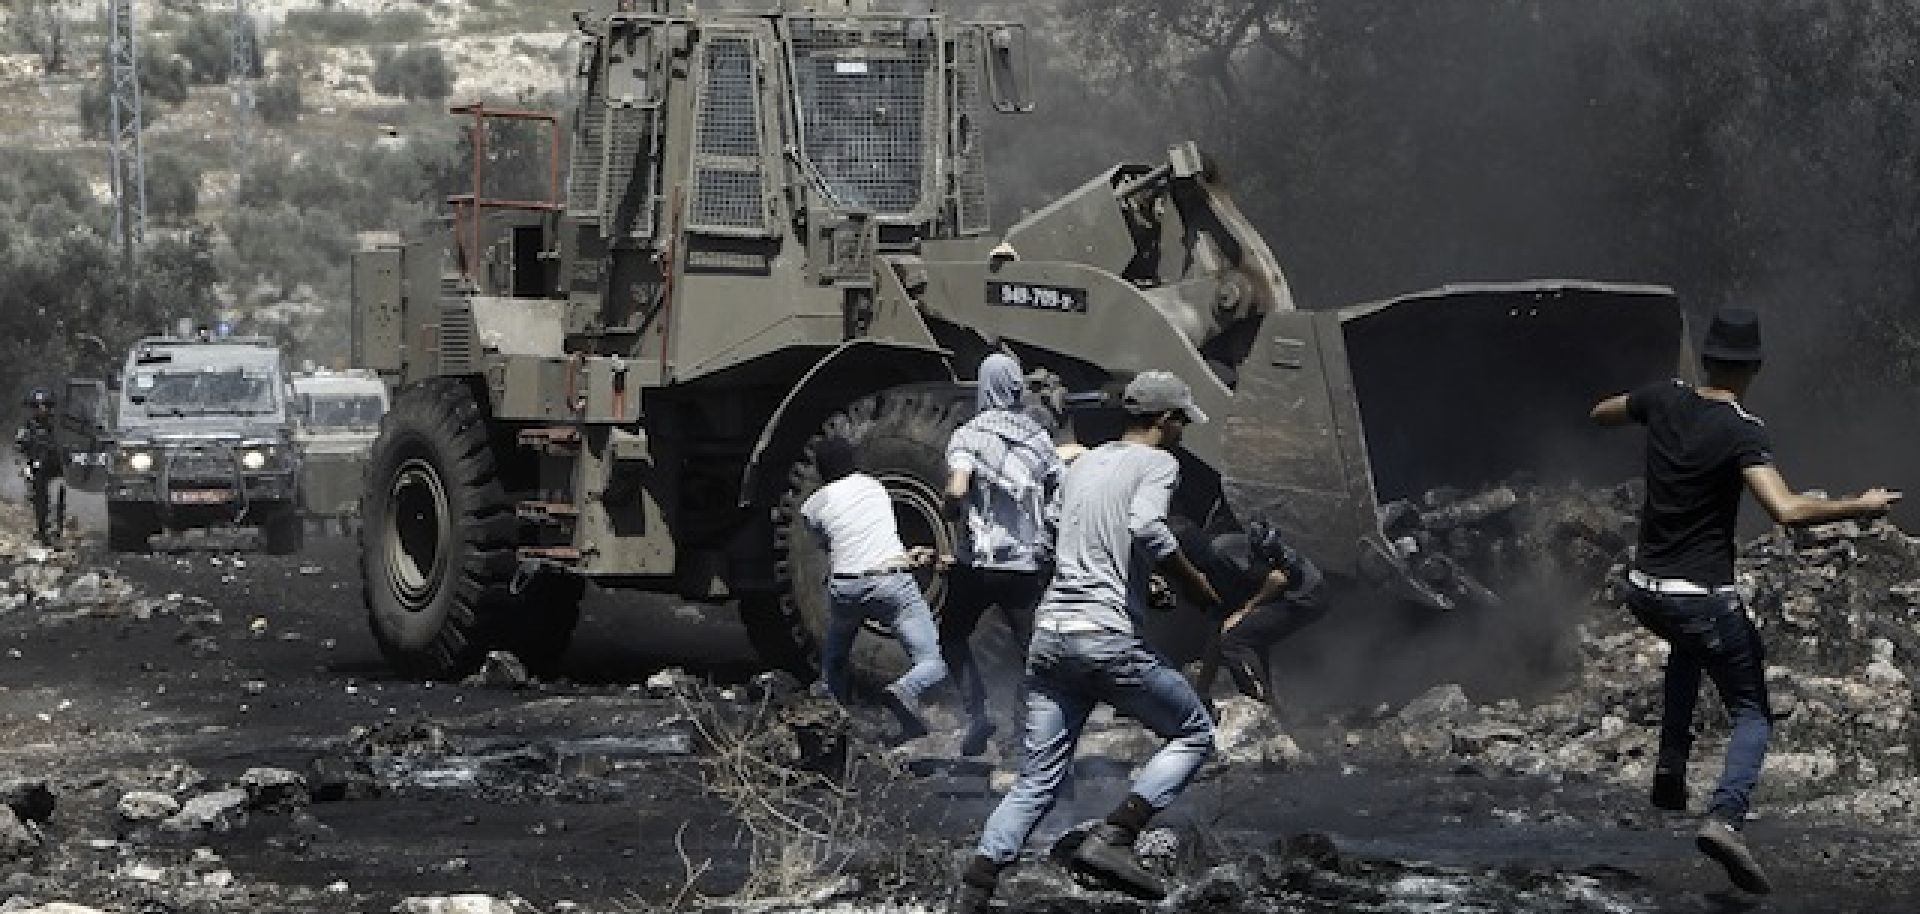 Analytic Guidance: Not the Usual Israeli-Palestinian Flare-Up